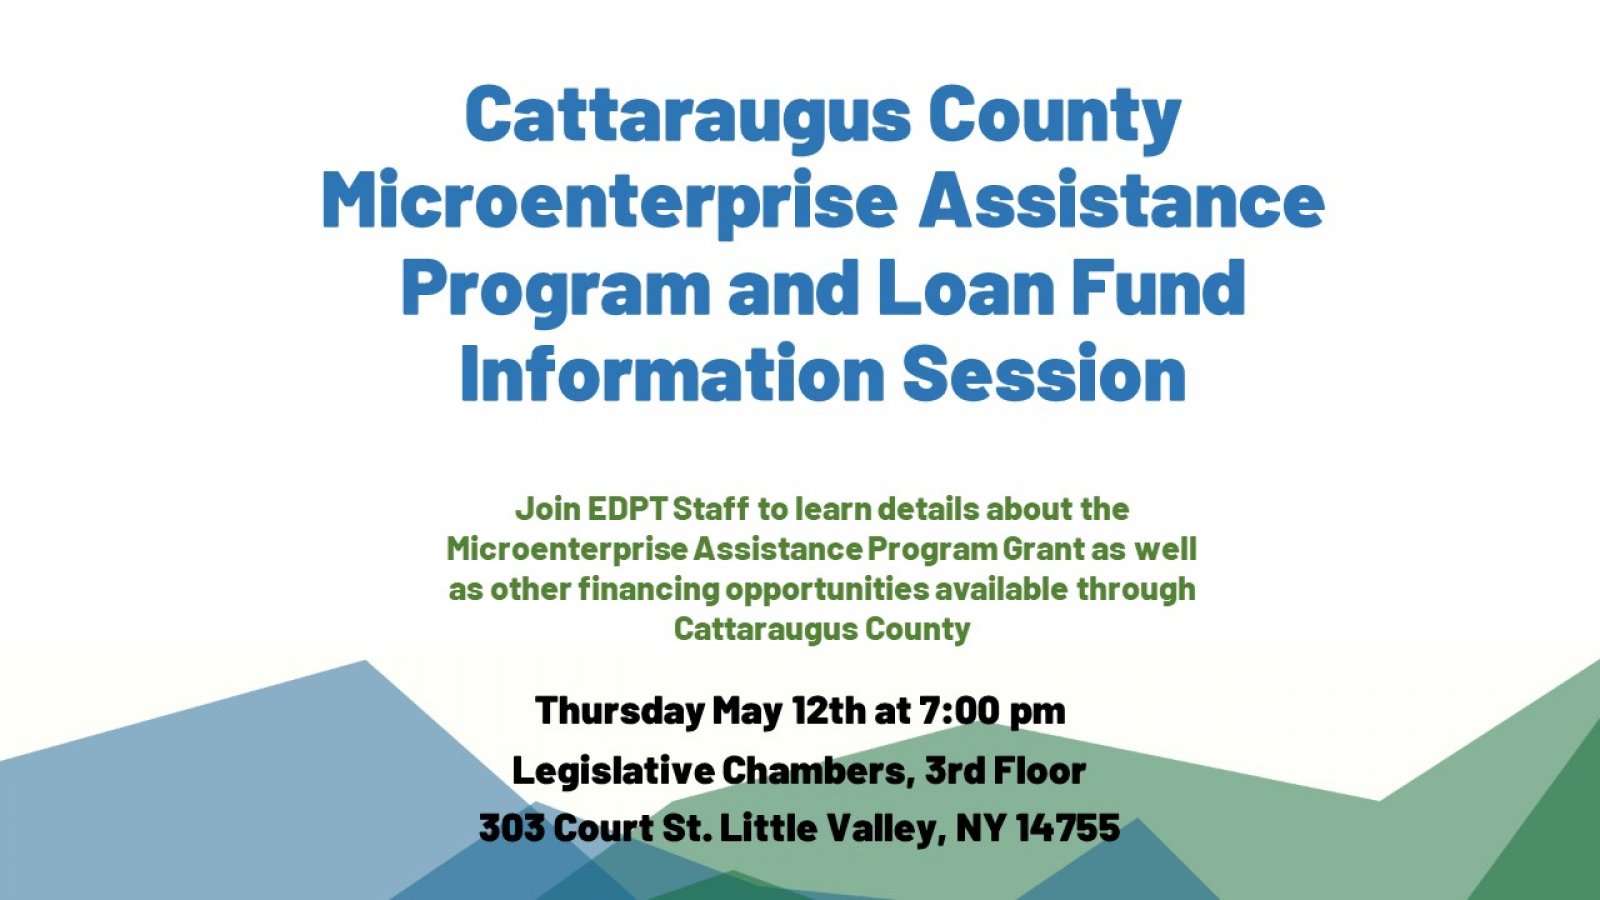 Cattaraugus County Microenterprise Assistance Program and Loan Fund Information Session on May 12, 2022 from 7PM